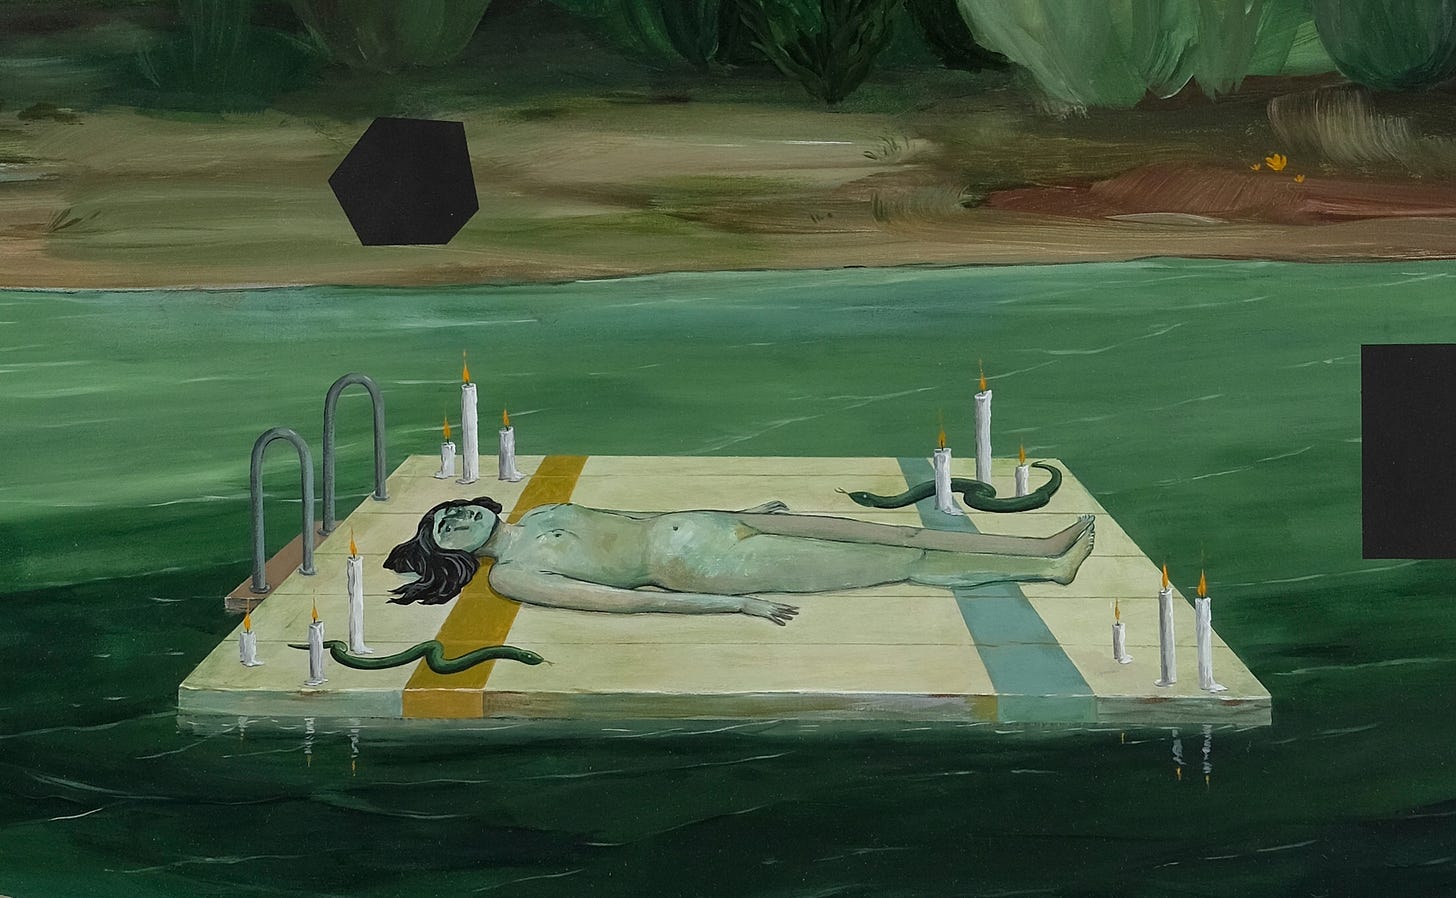 Detail of a green painting of a nude figure lying on a floating dock in green water. The figure is surrounded by snakes and lit candles.